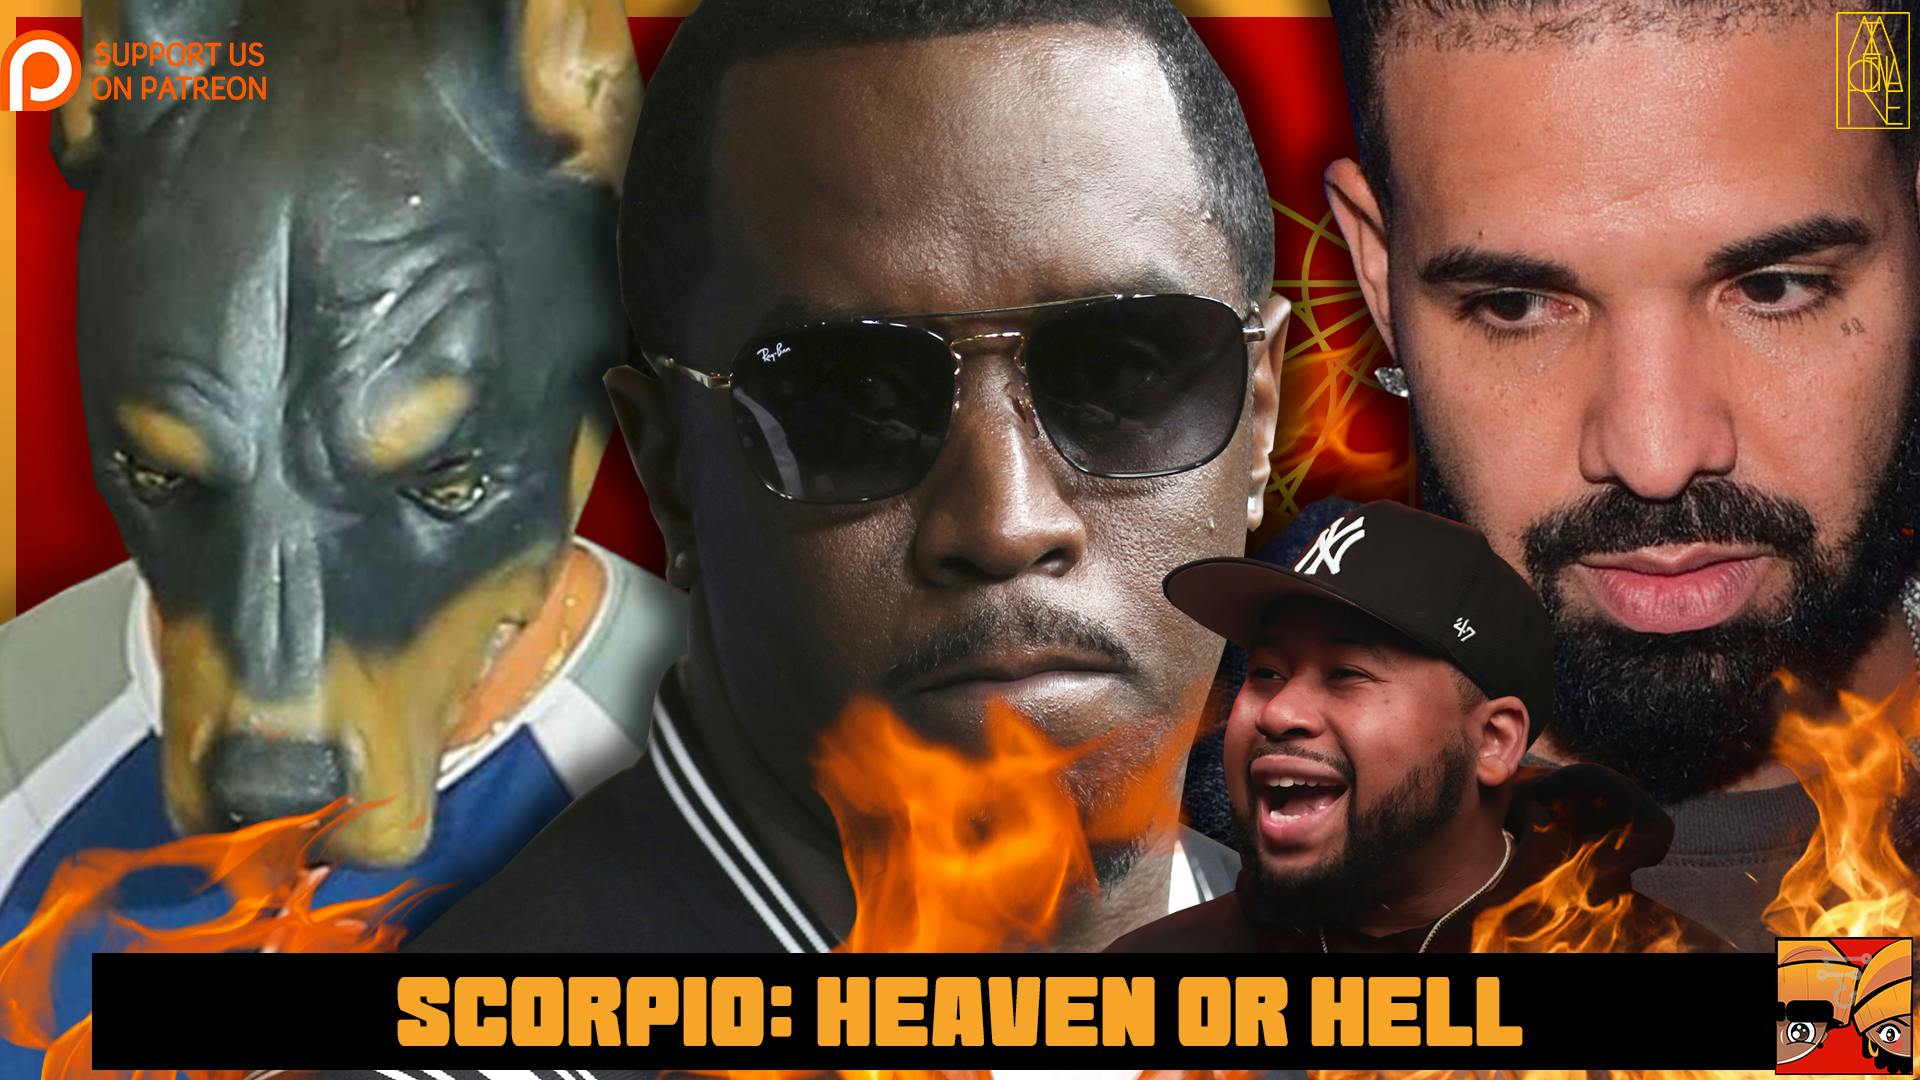 SCORPIO: HEAVEN OR HELL event cover photo